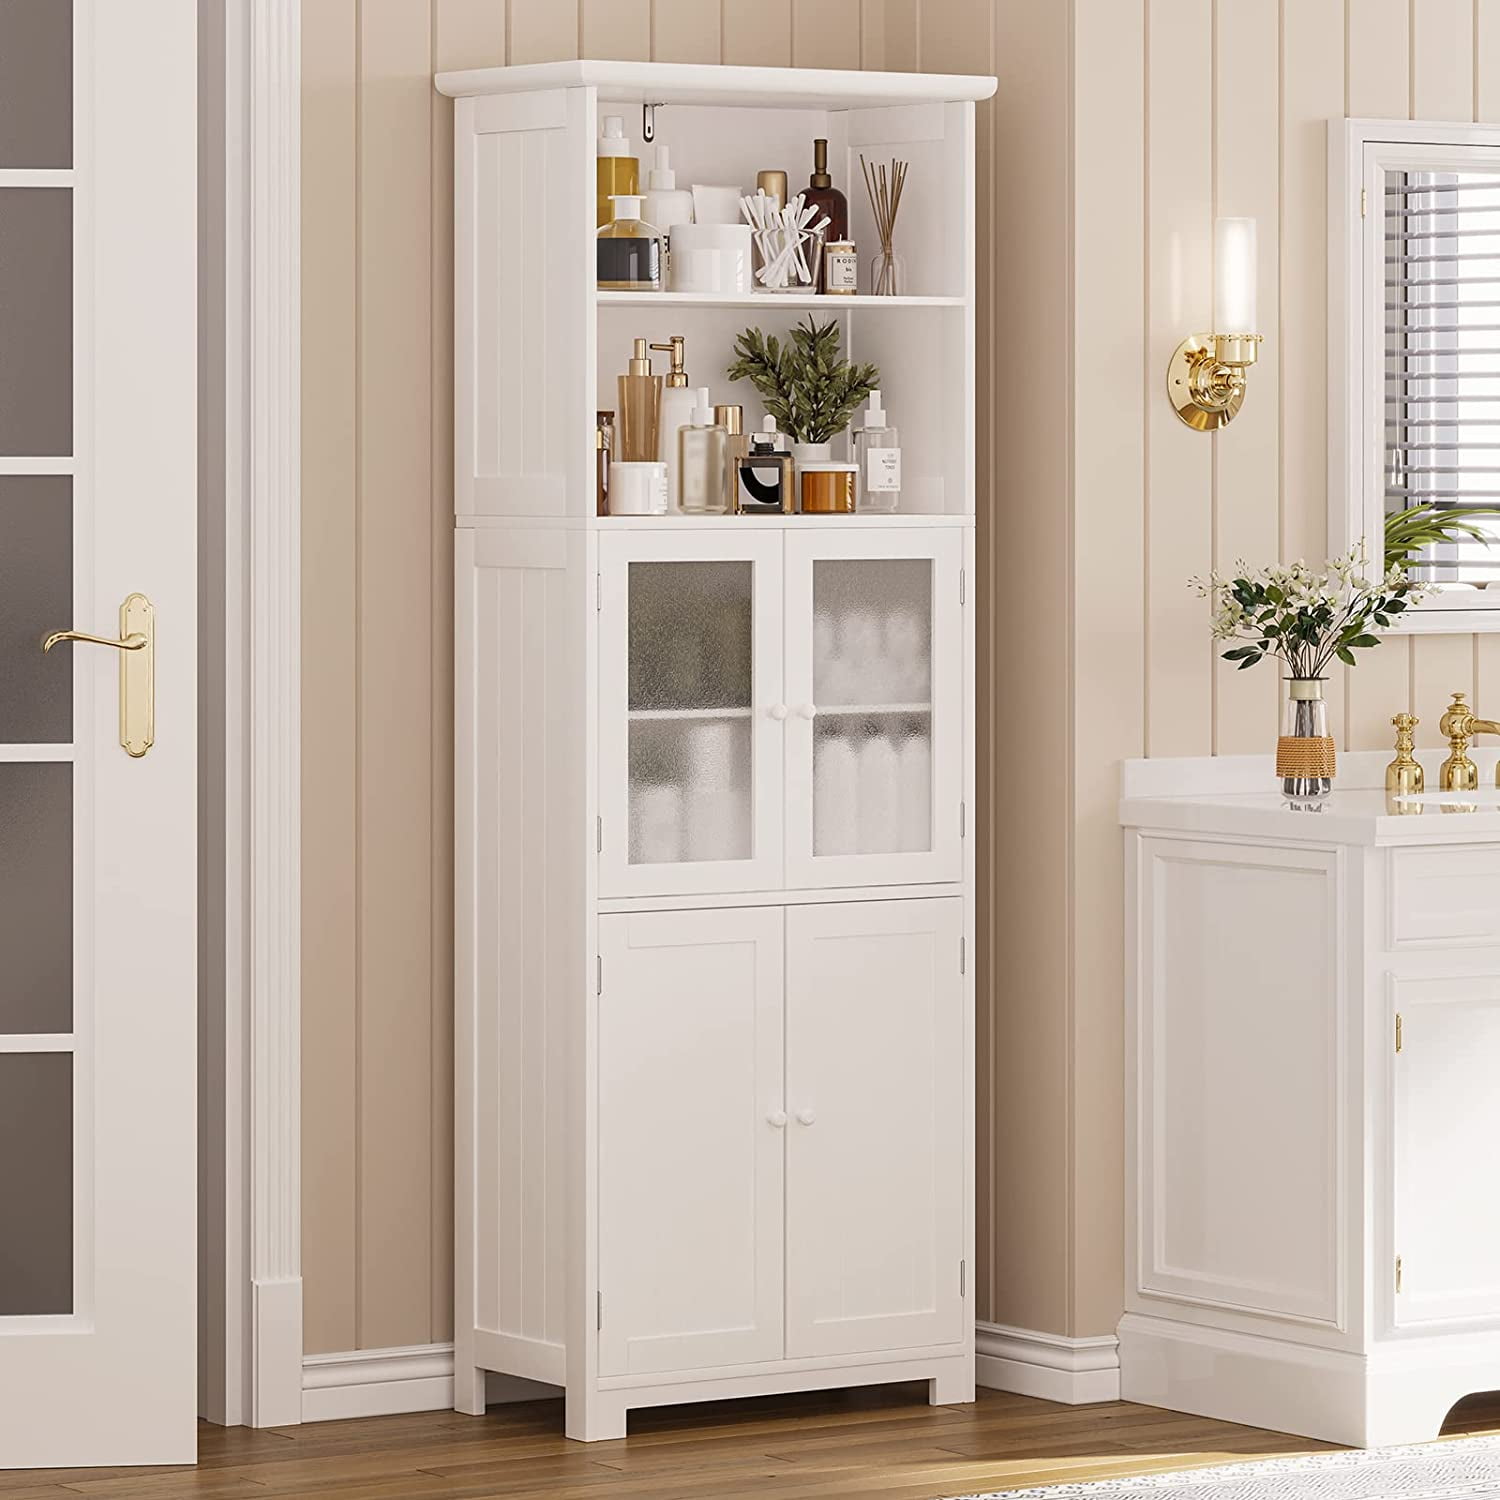  Tiptiper Tall Large Floor Storage Cabinet with Open  Compartments and 2 Cabinets with Doors, 64” Height Freestanding Linen Tower  Cabinet, for Home Kitchen, Bathroom, Living Room, White : Home & Kitchen